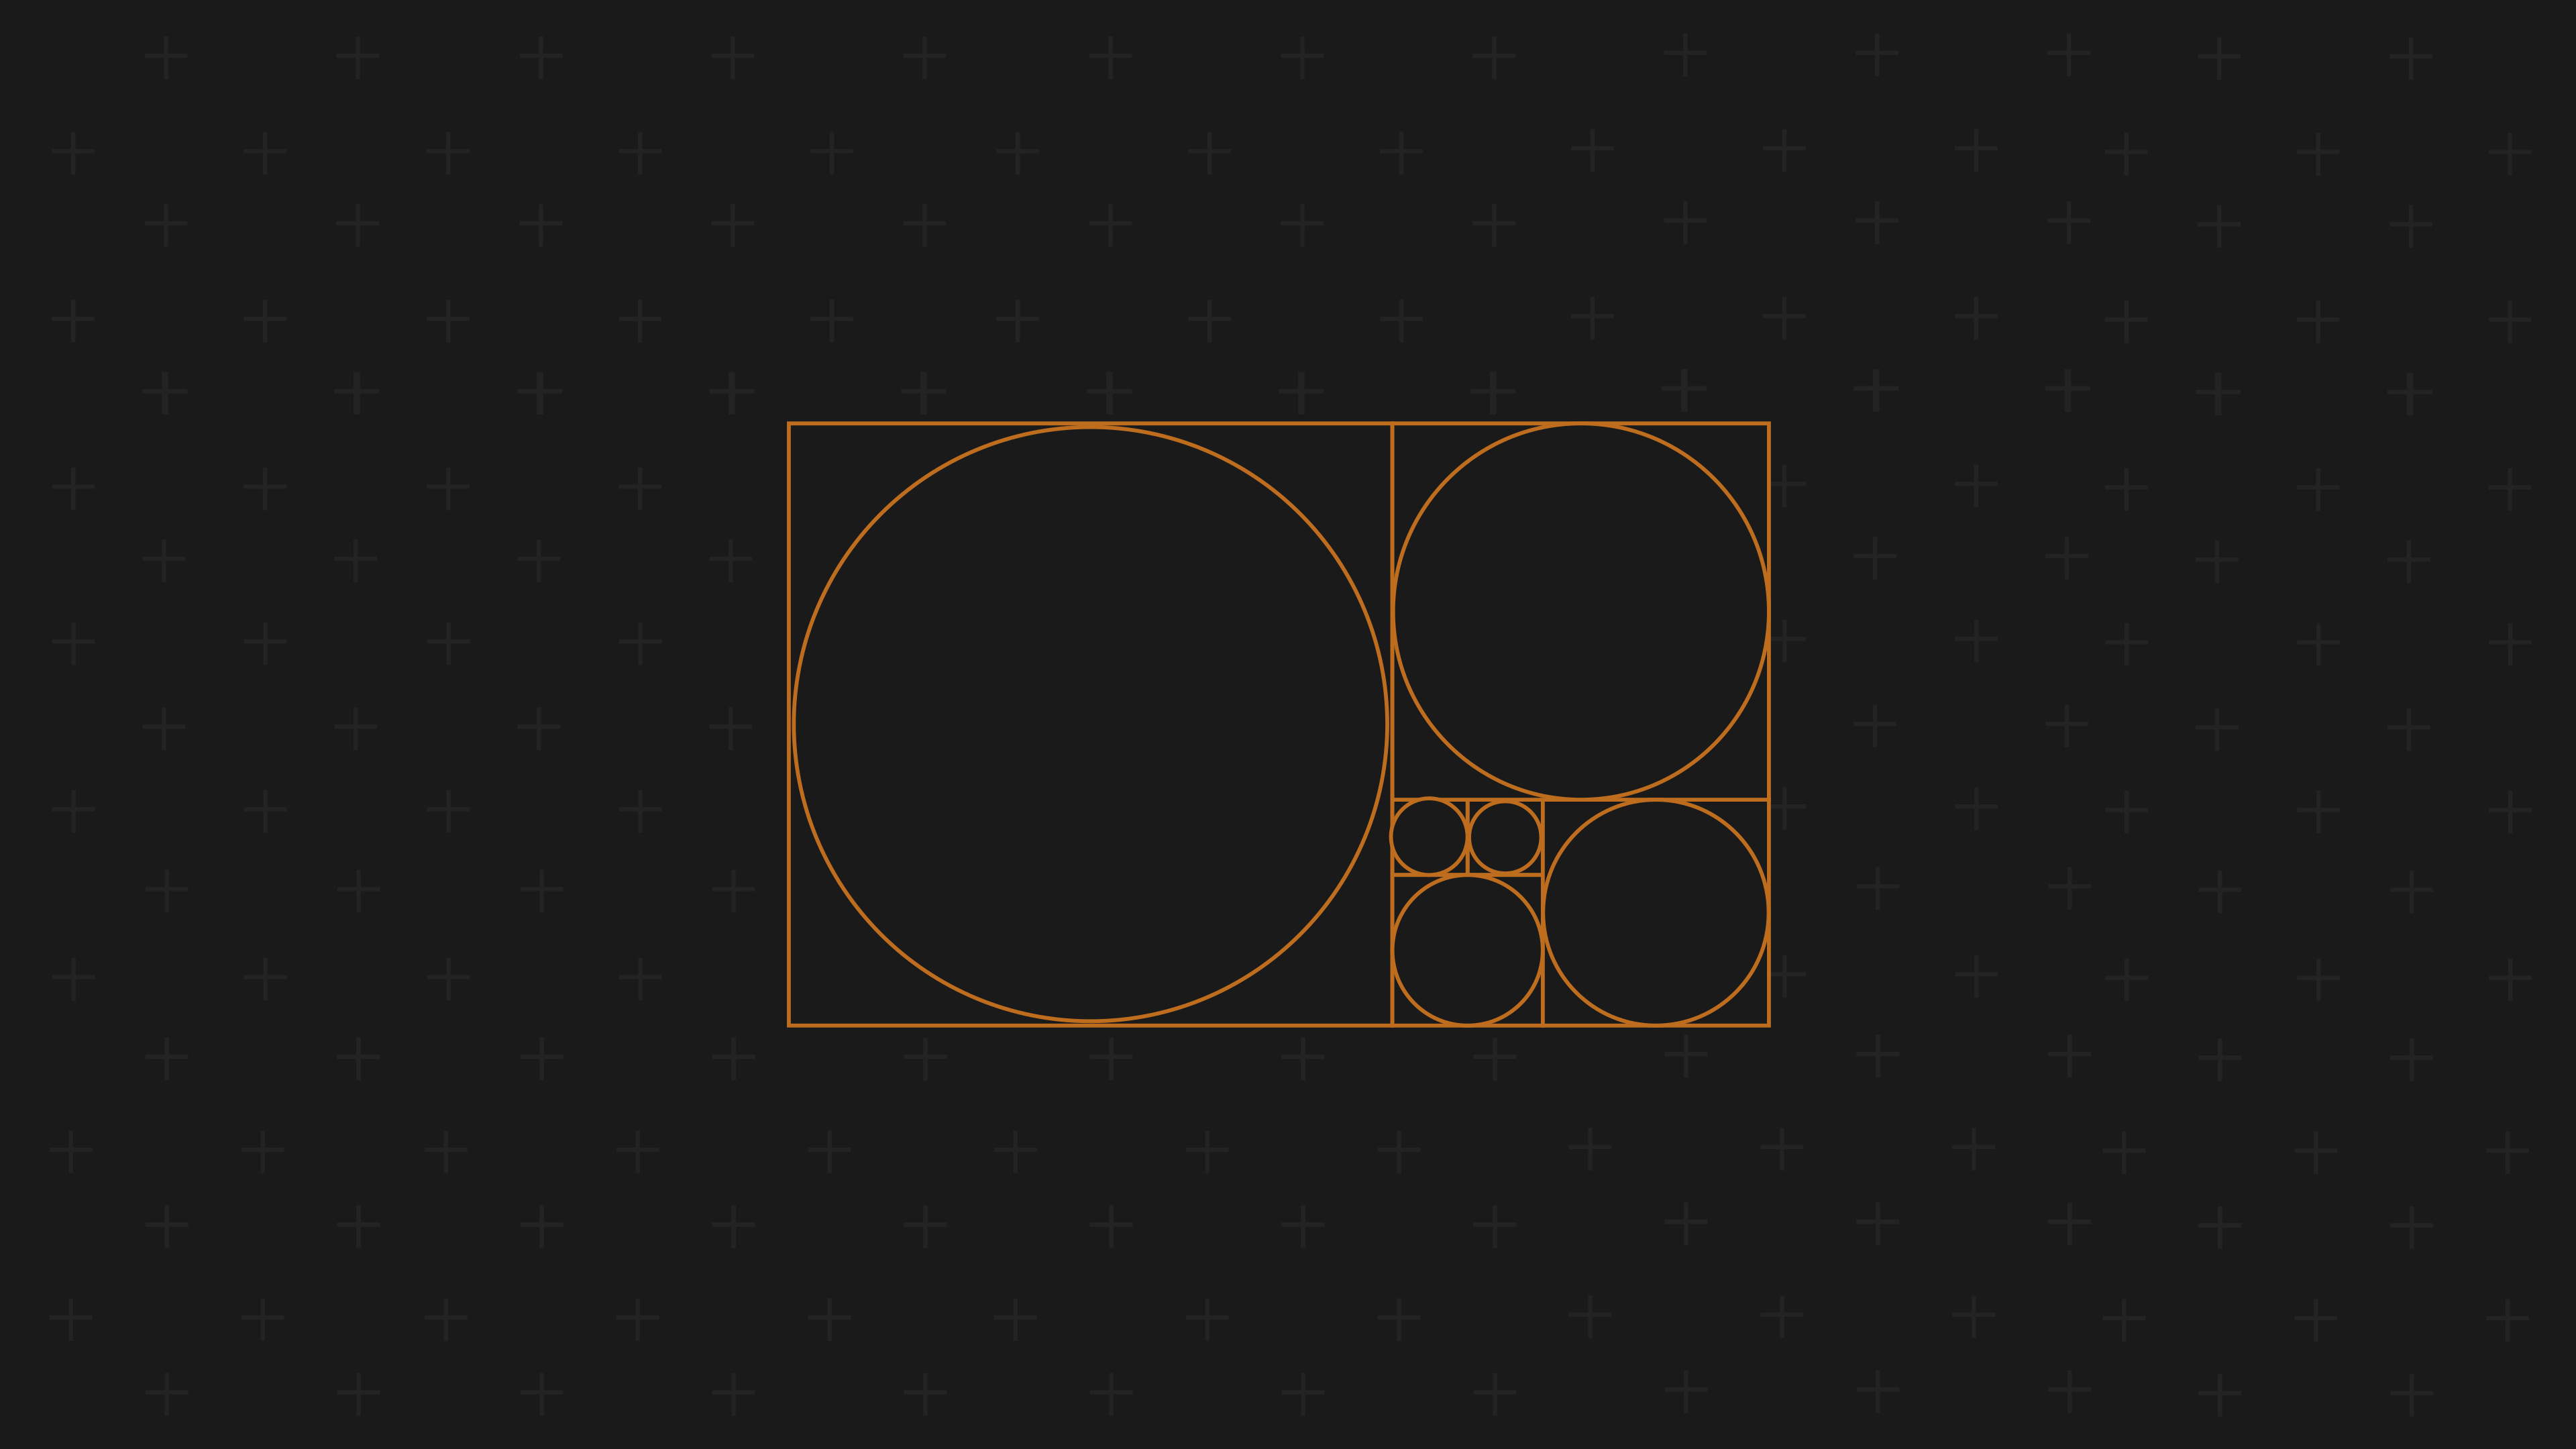 Golden Ratio: Proportions, Symmetry, Circles, Squares, Right angles, Geometry, Harmonic division. 3840x2160 4K Background.